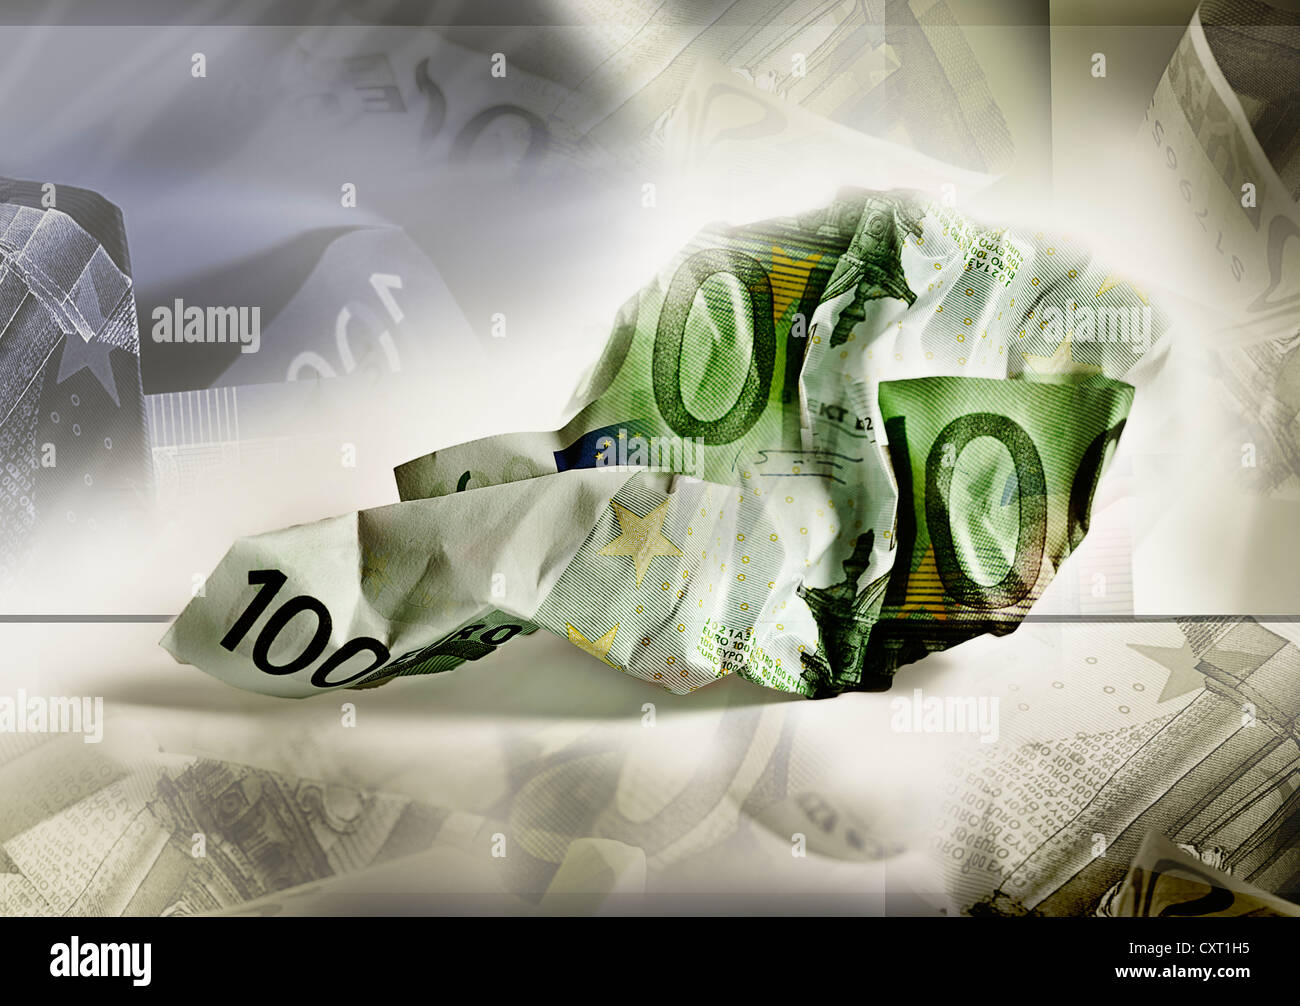 Crumpled euro banknote in the shape of Austria, symbolic image Stock Photo